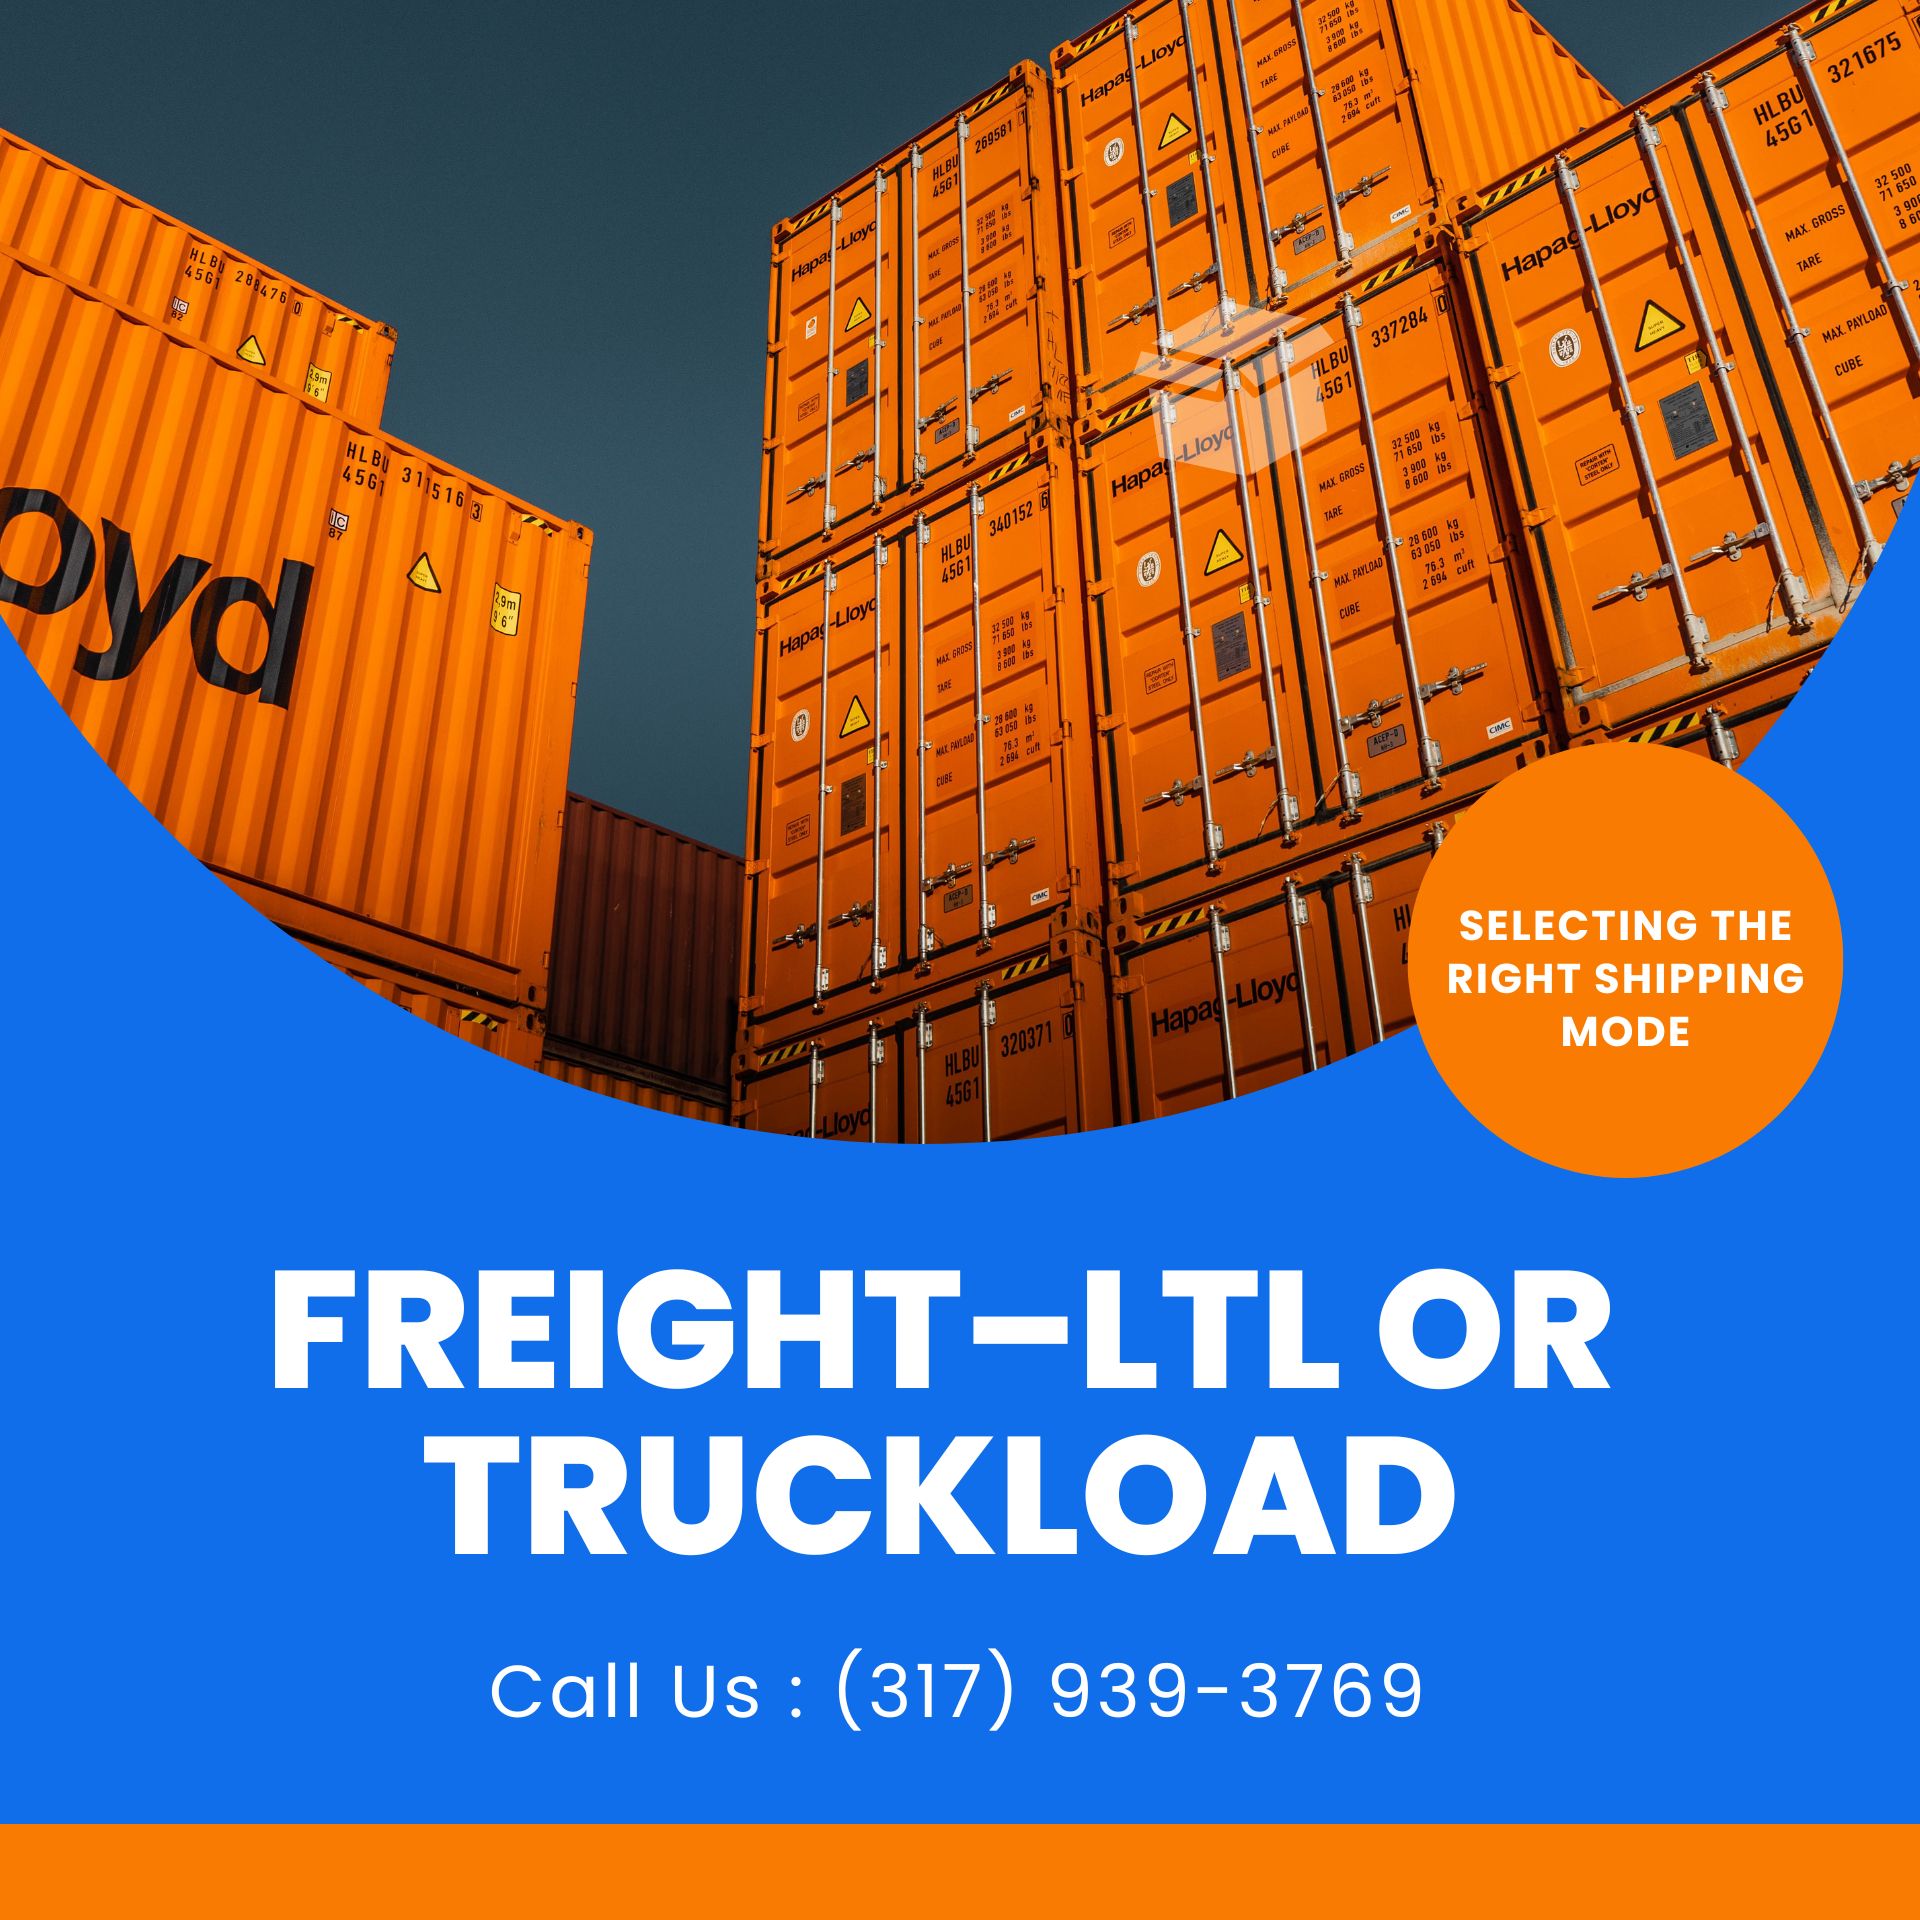 What would be the best mode for your freight–LTL or Truckload (TL)?